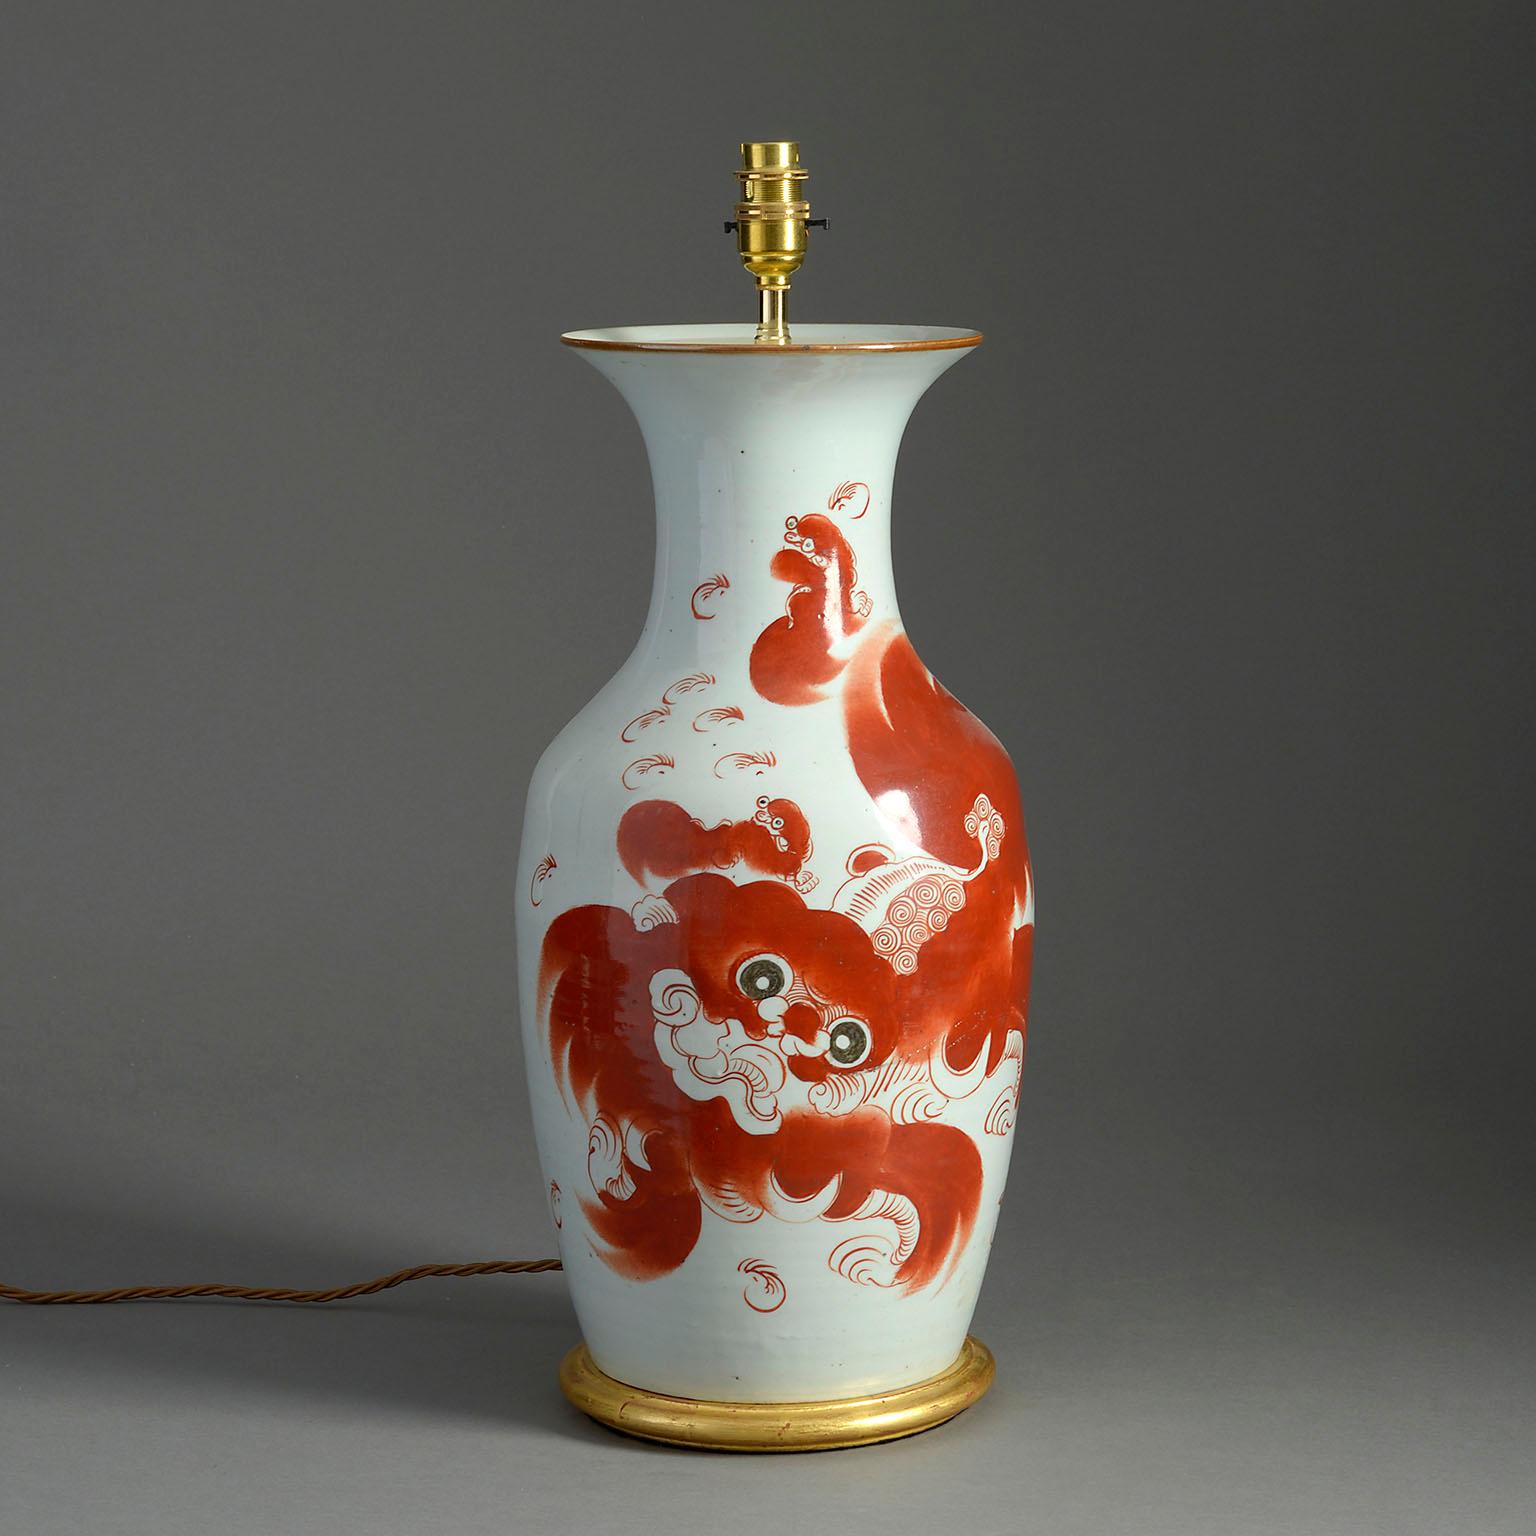 A twentieth century porcelain baluster vase of good scale, decorated with a red dog of fo upon a white ground, the reverse side with Chinese characters. Mounted on a turned giltwood base as a table lamp.

Dimensions refer to vase and giltwood base